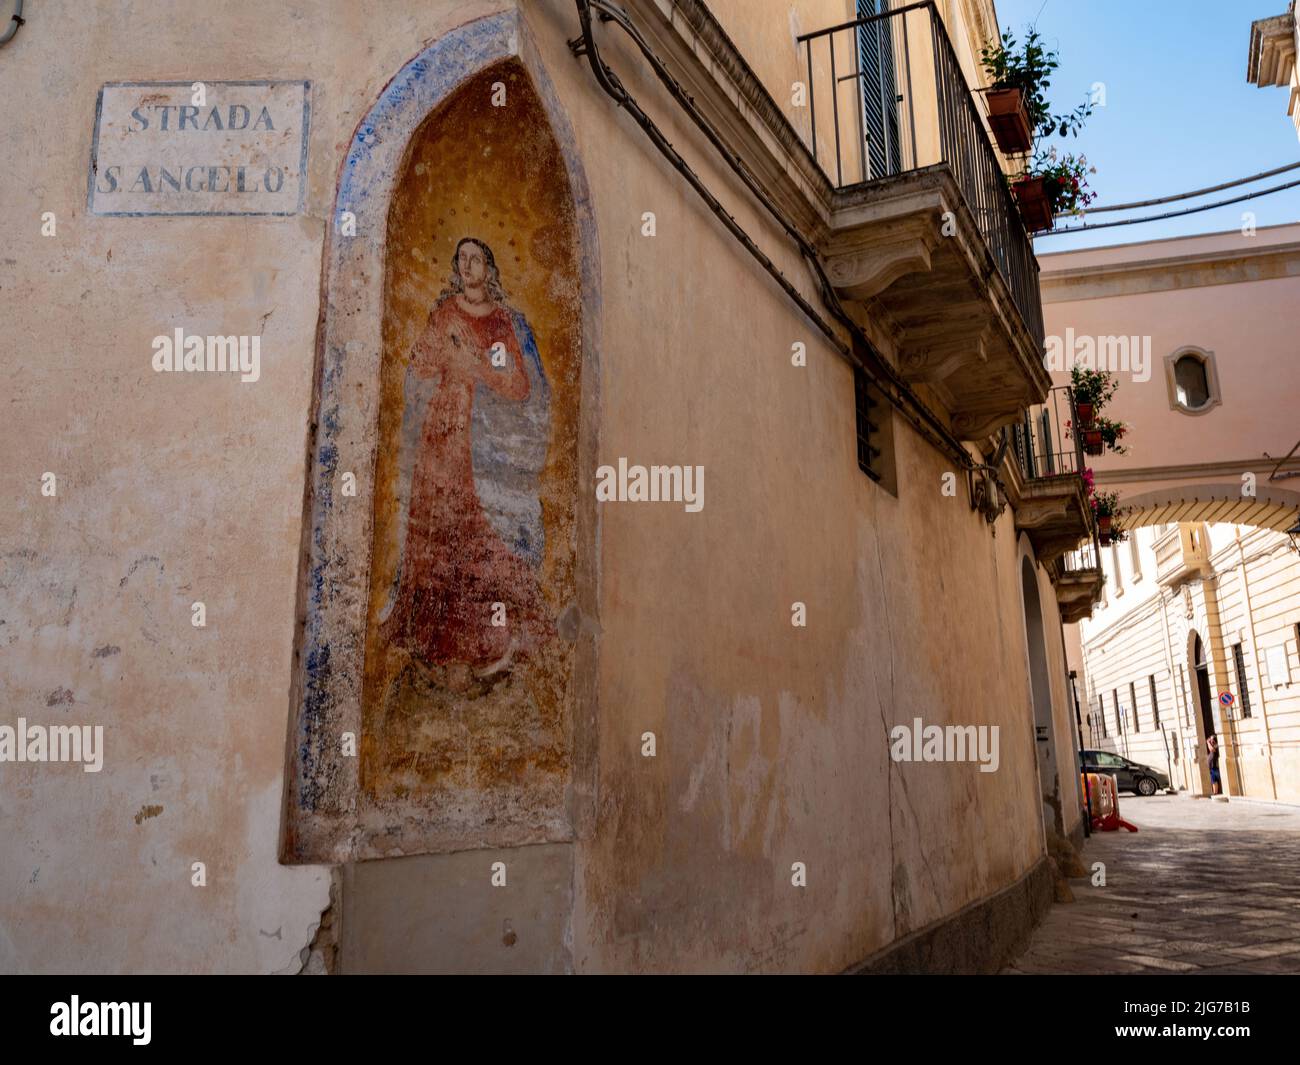 Street scene in the Old City of Nardo, Puglia with a cutout of the Virgin Mary at an intersection of two streets to give travelers a momentary pause Stock Photo